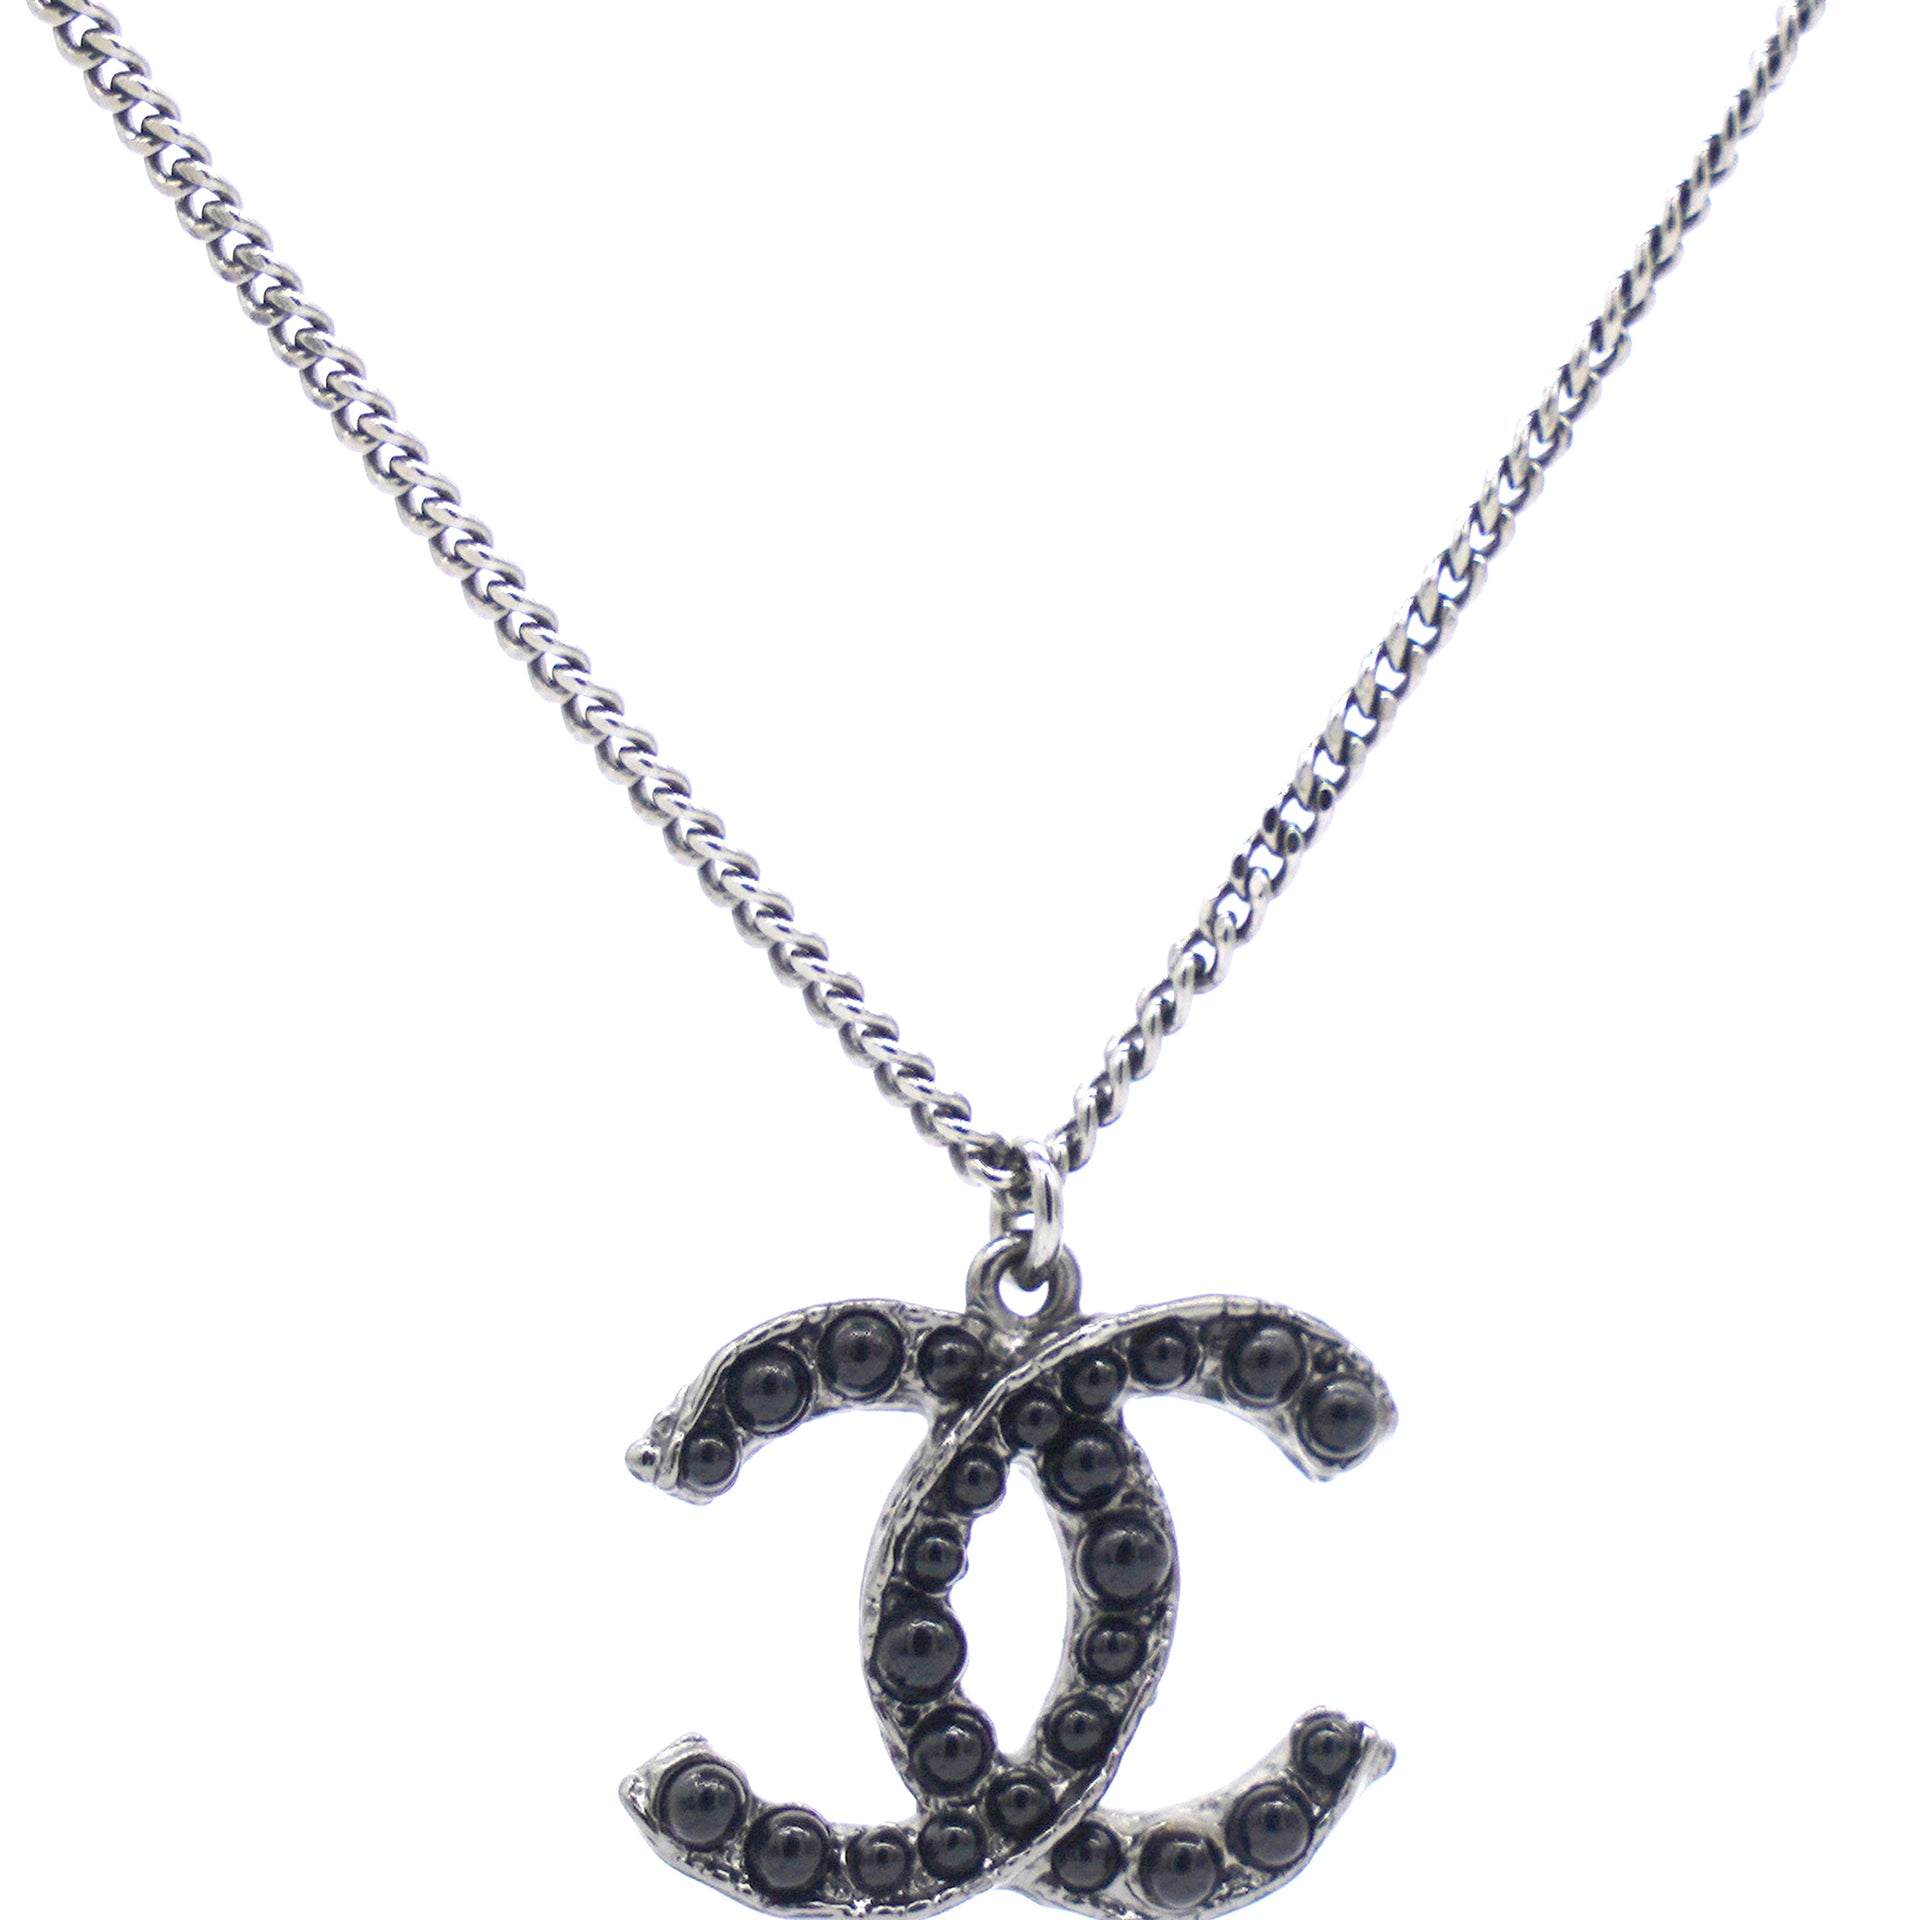 Cc pearl necklace Chanel Black in Pearl - 36483404